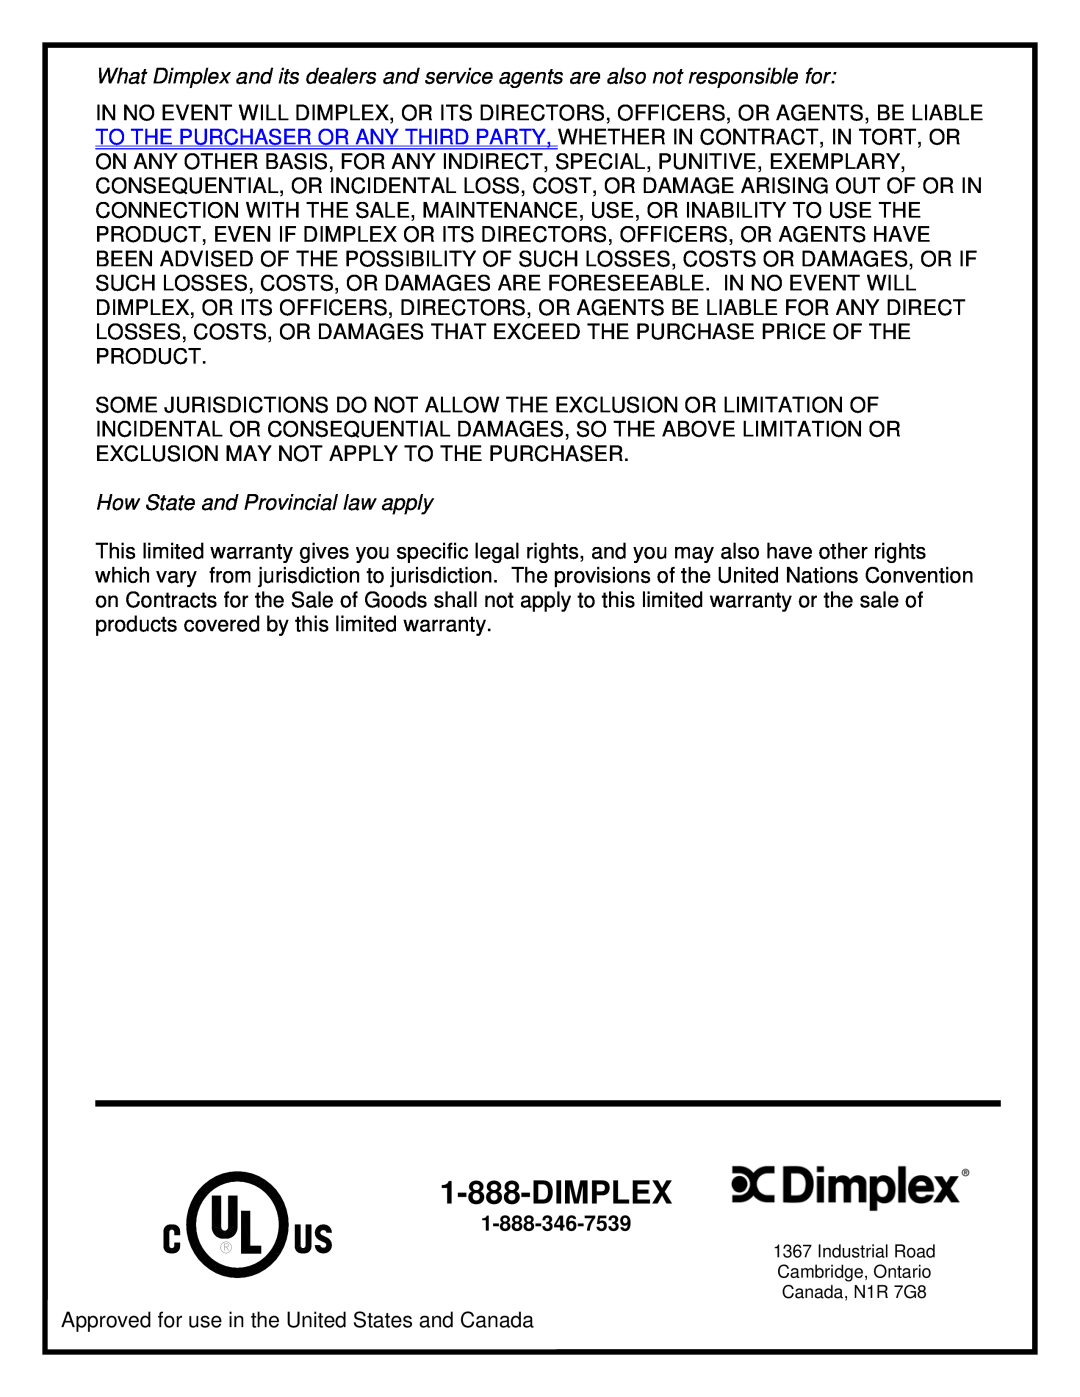 Dimplex BF33STP/DXP, BF39STP/DXP manual Dimplex, How State and Provincial law apply 